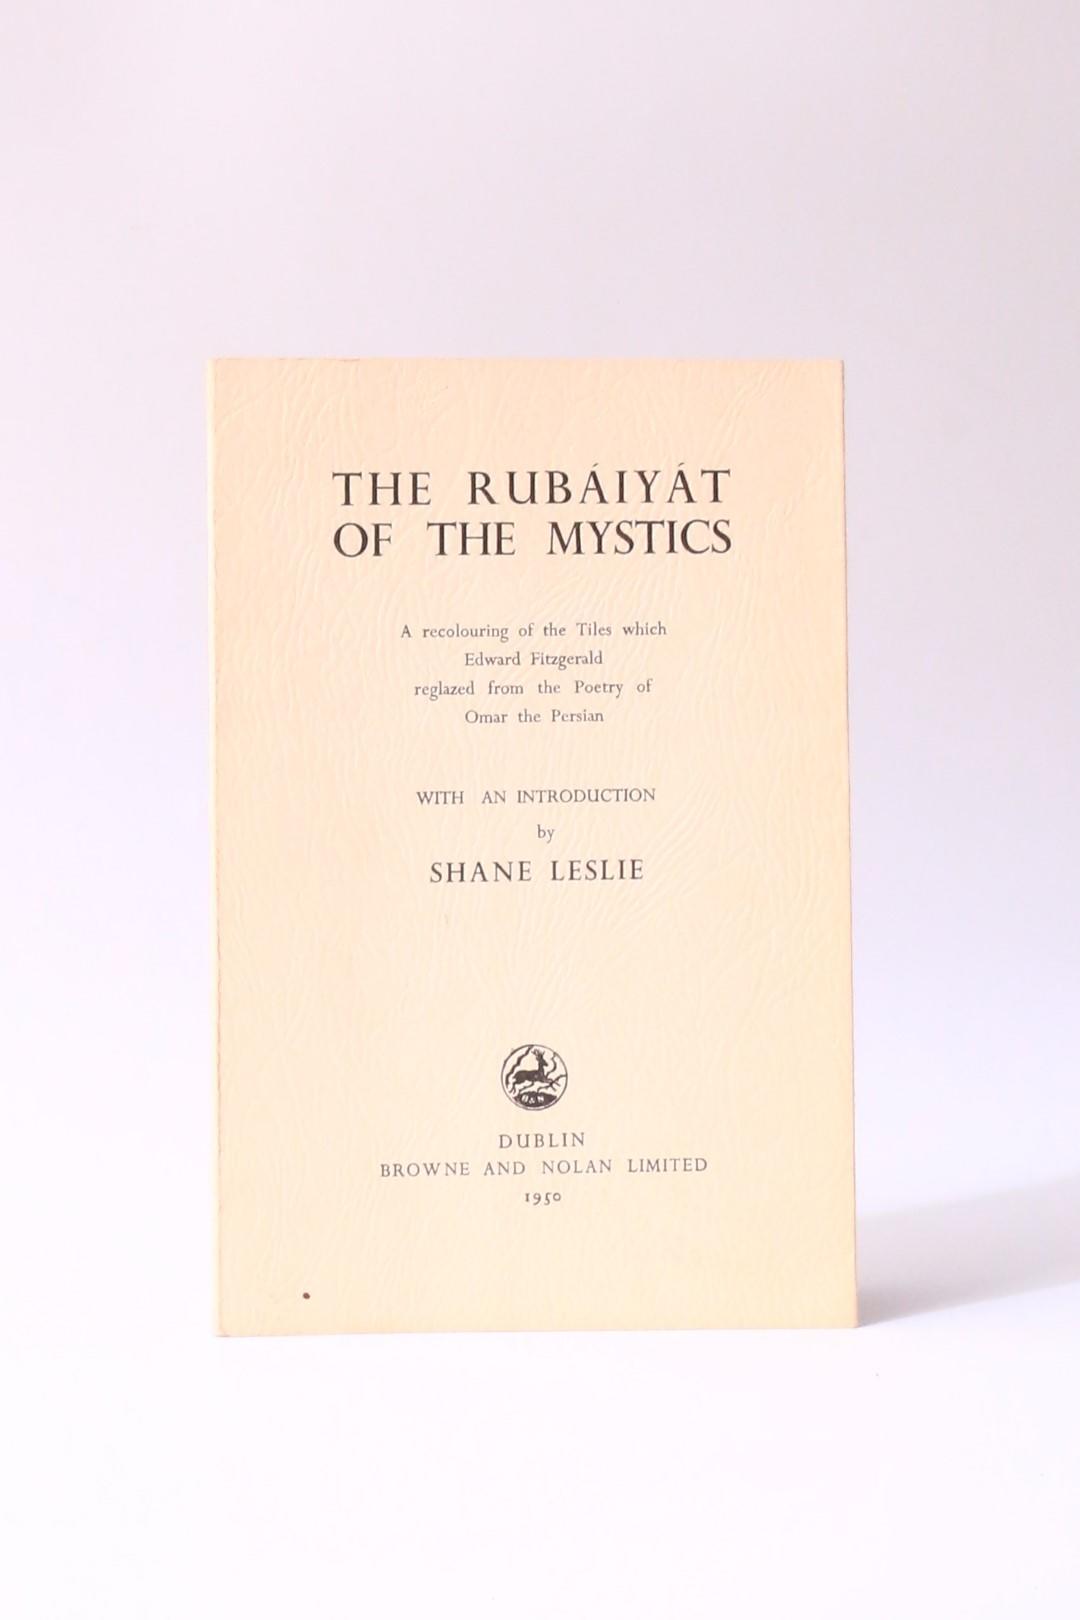 [Shane Leslie] - The Rubaiyat of the Mystics - Browne and Nolan, 1950, Signed First Edition.